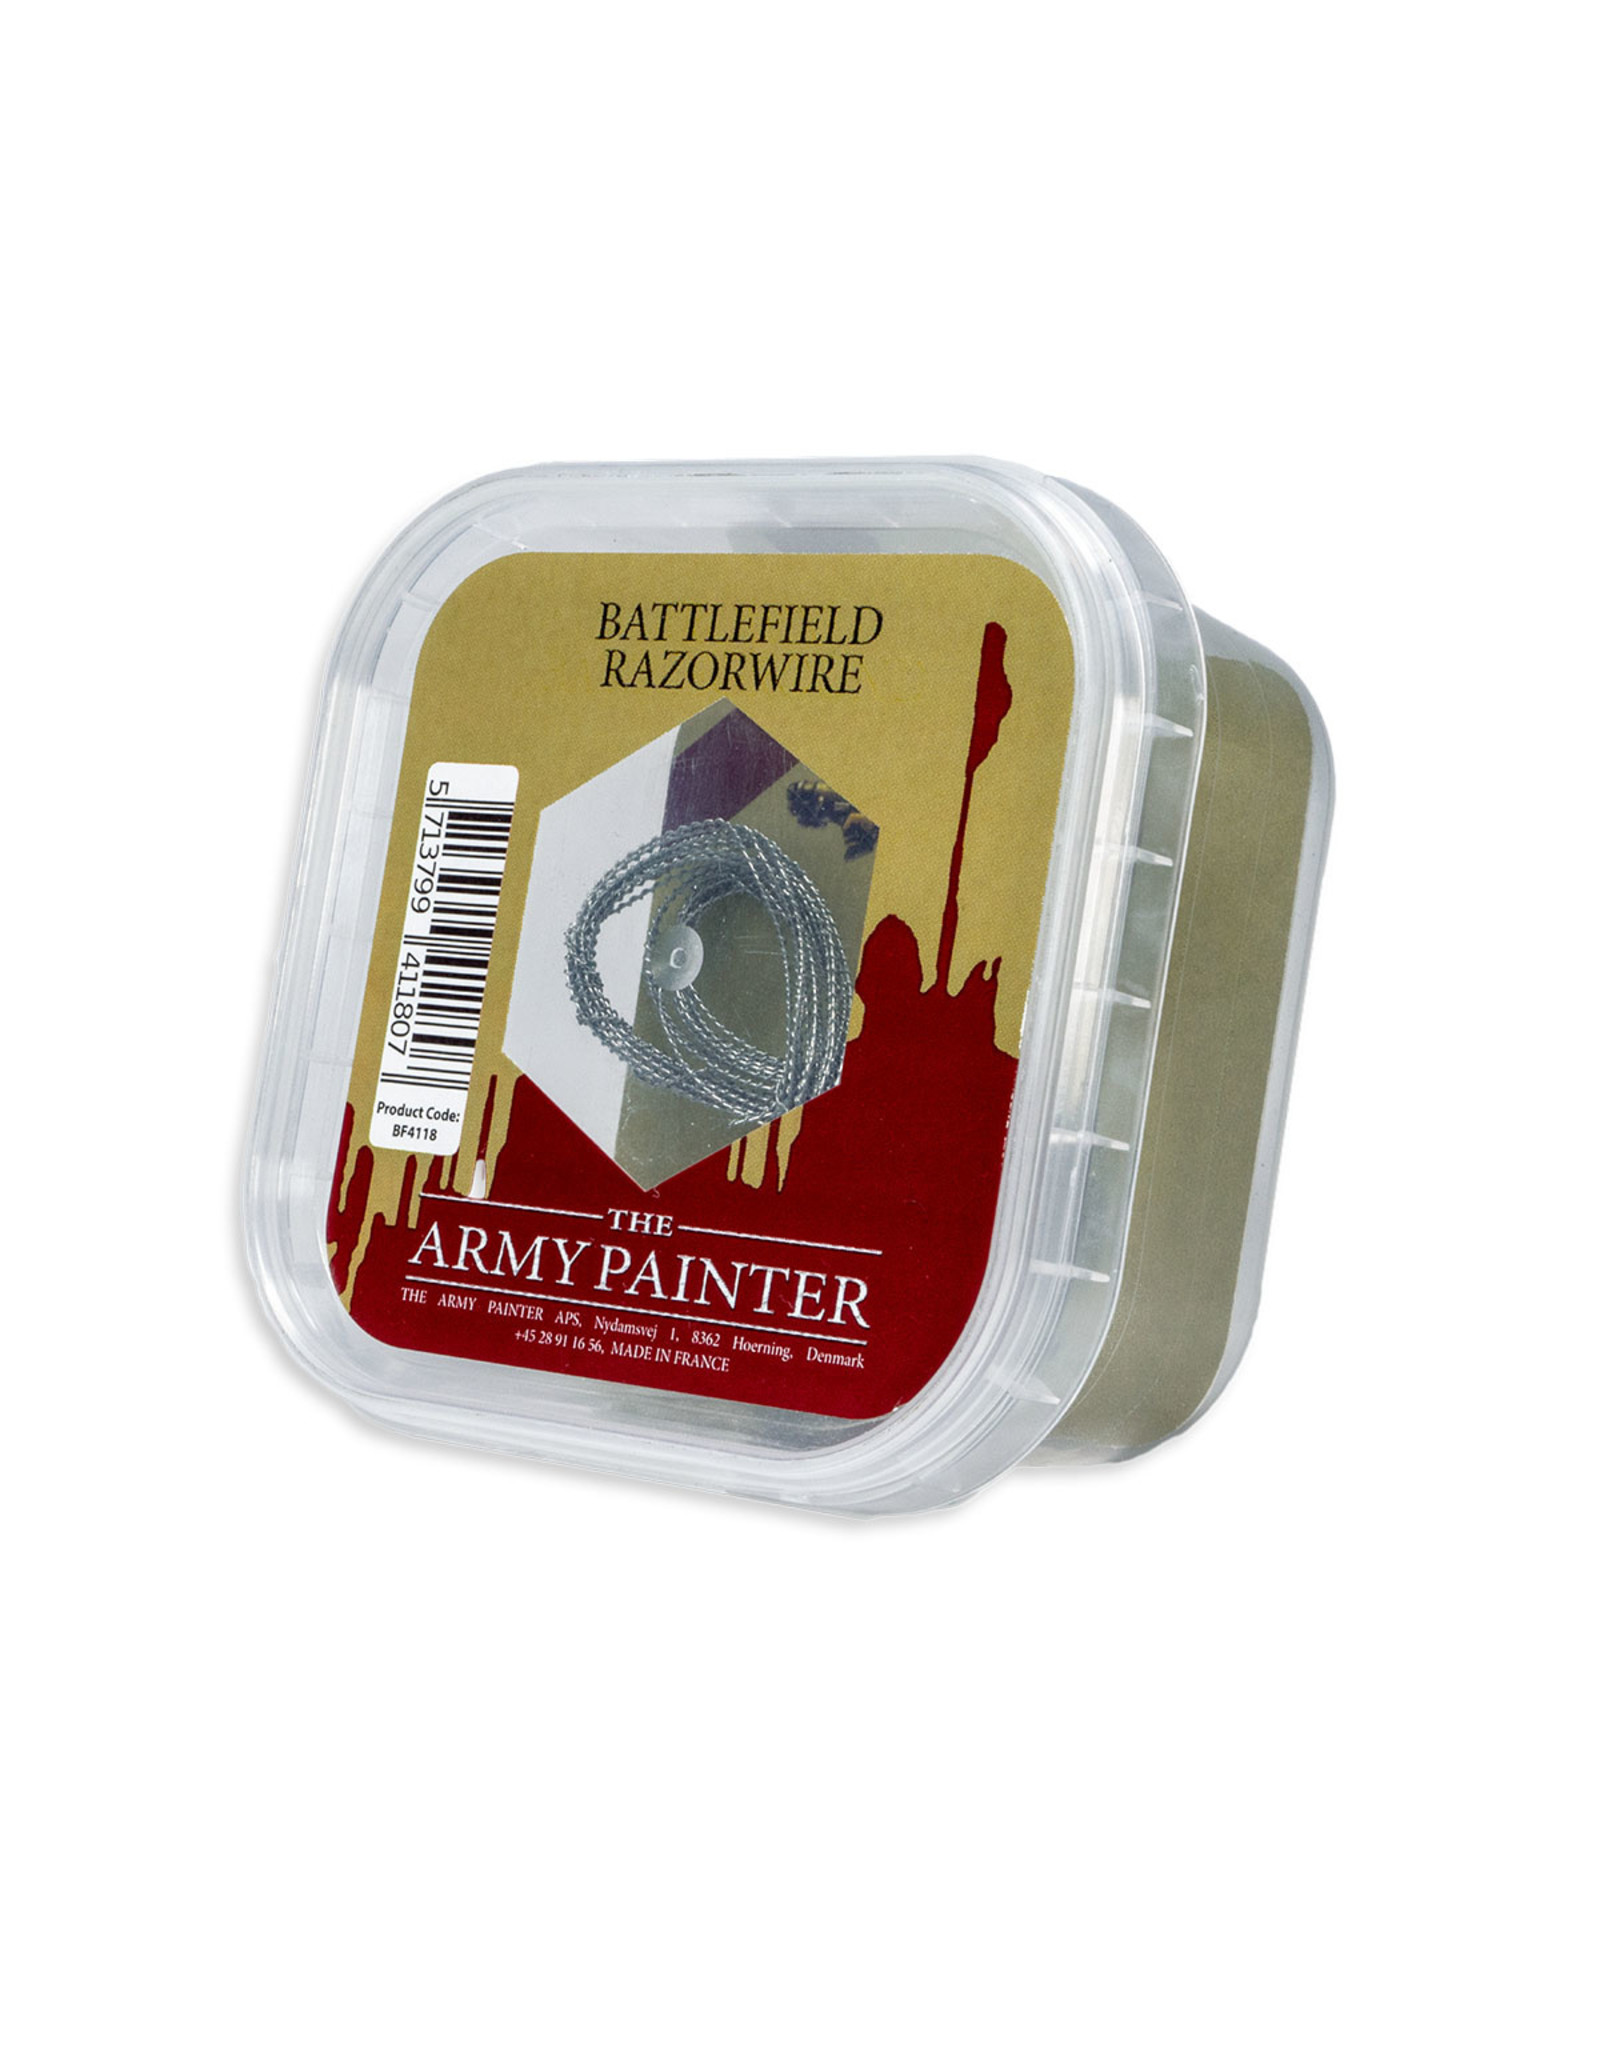 The Army Painter The Army Painter Battlefield Basing: Battlefield Razorwire